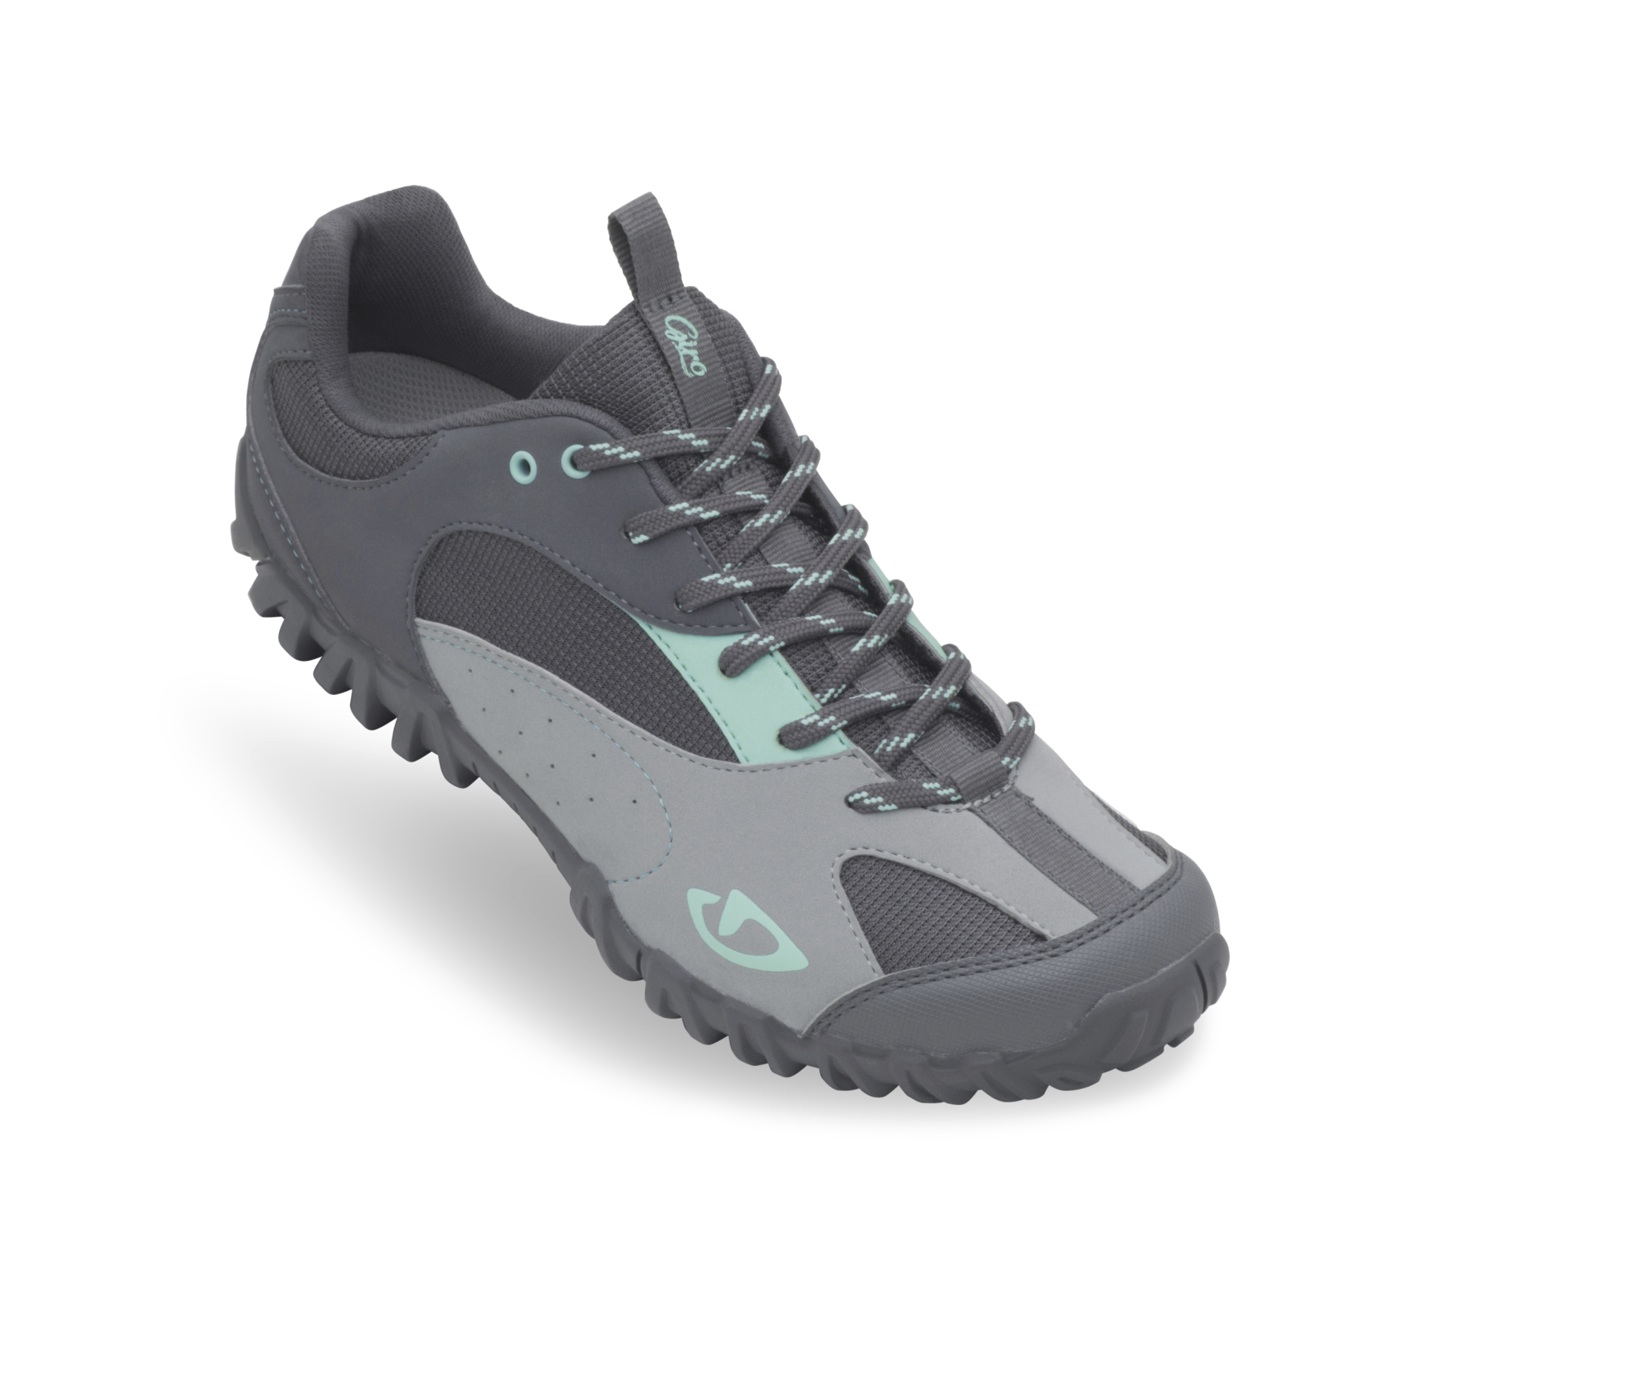 Download this Scotts Valley Brain Giro Petra Shoe Model Part The picture